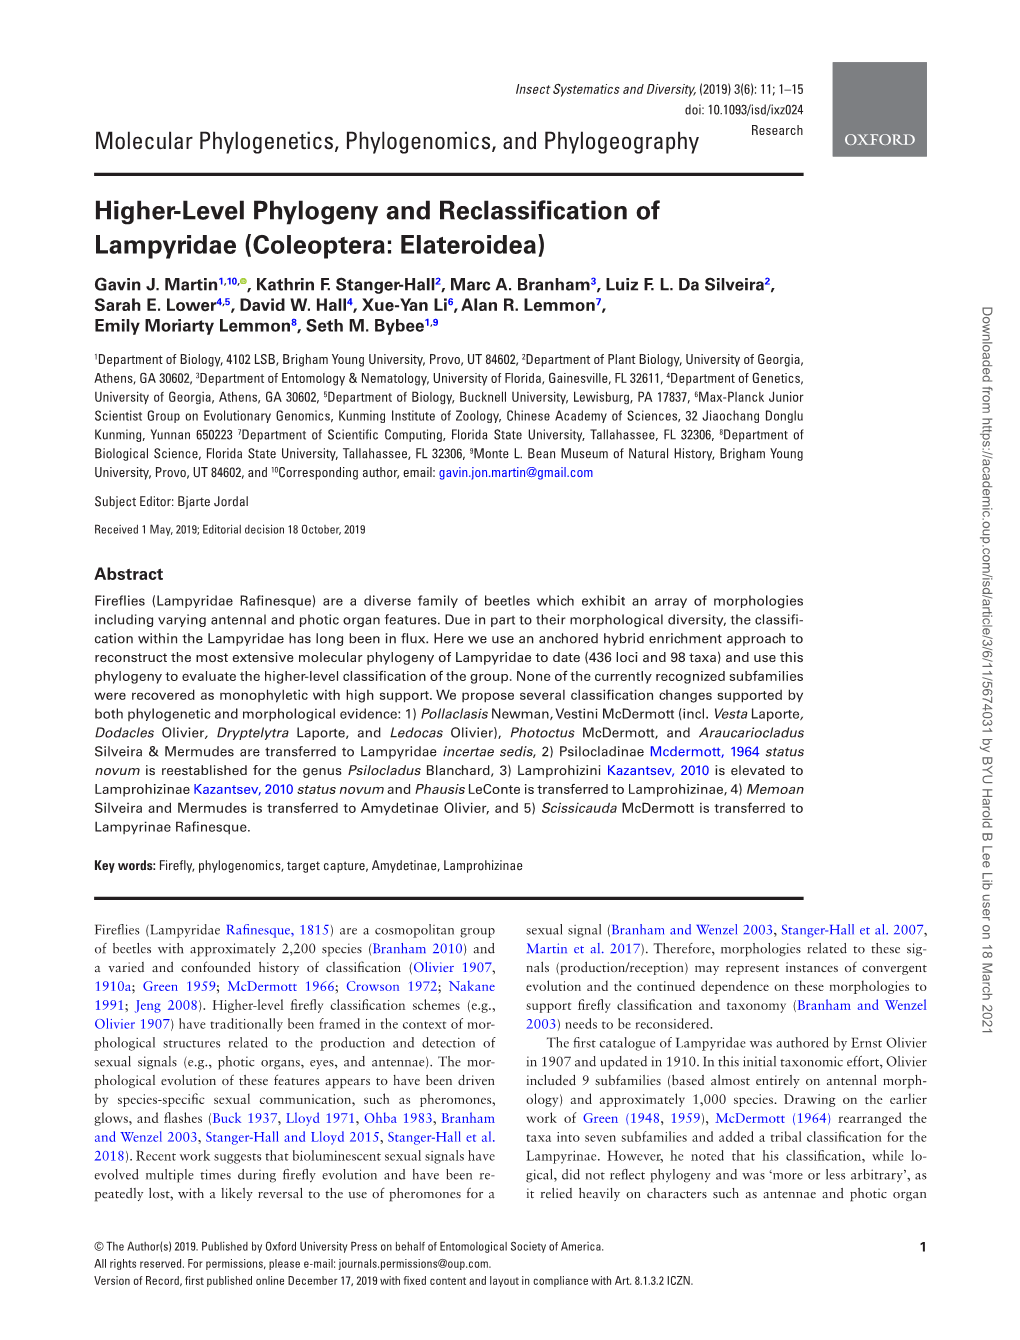 Higher-Level Phylogeny and Reclassification of Lampyridae